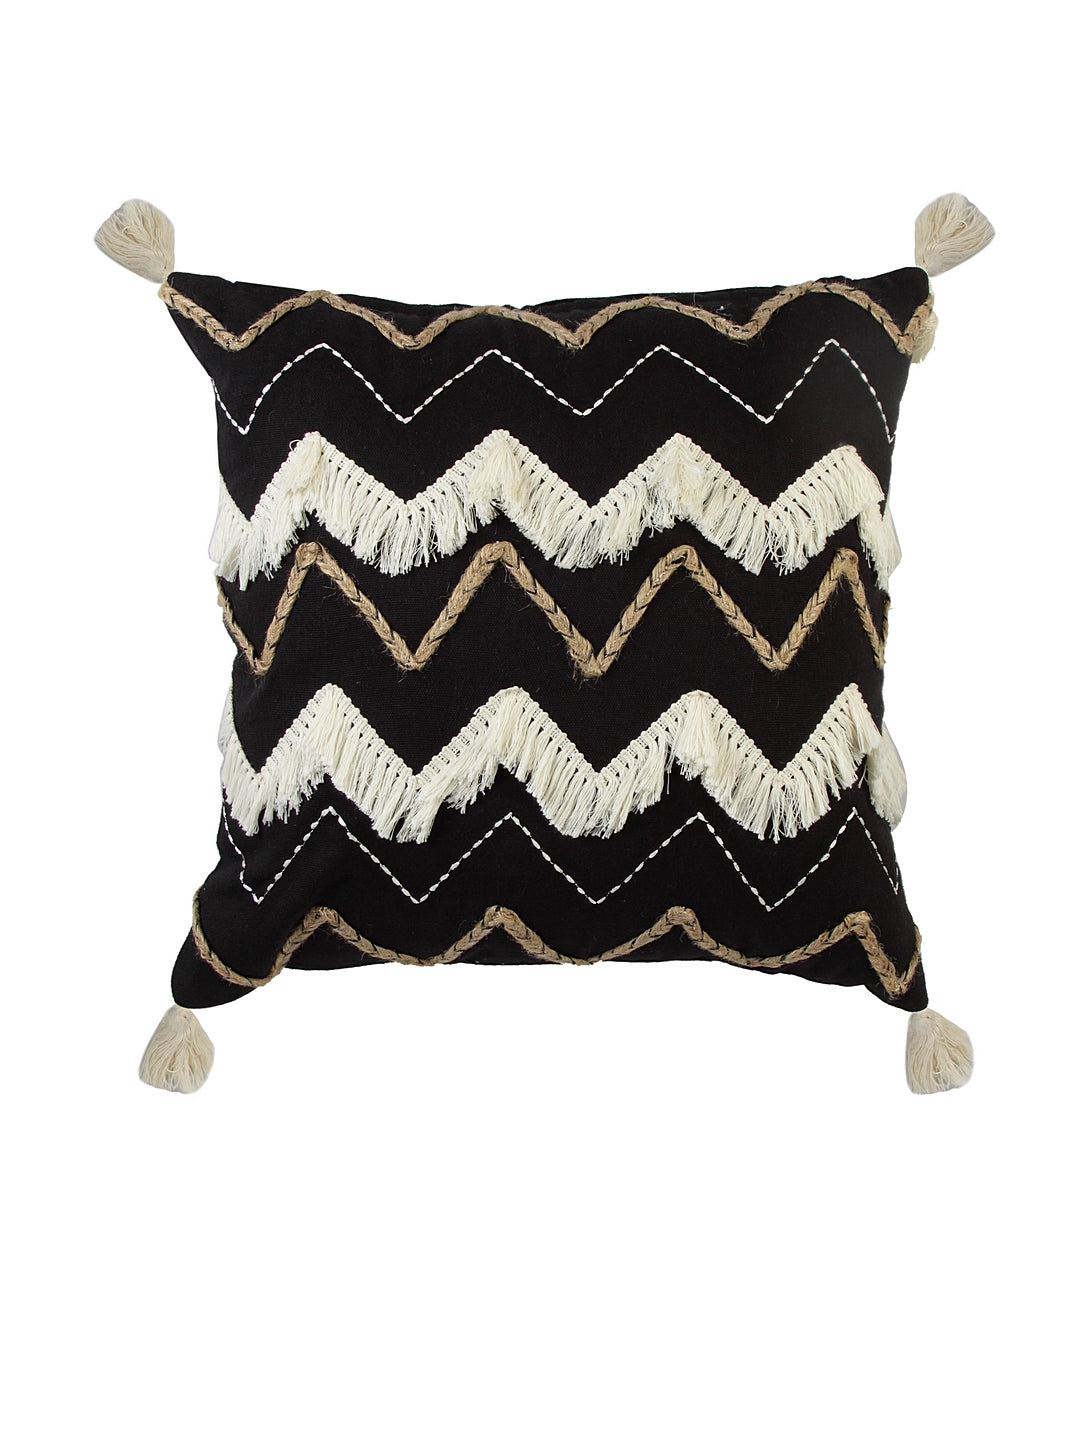 Chevron Embroidered Cushion Cover